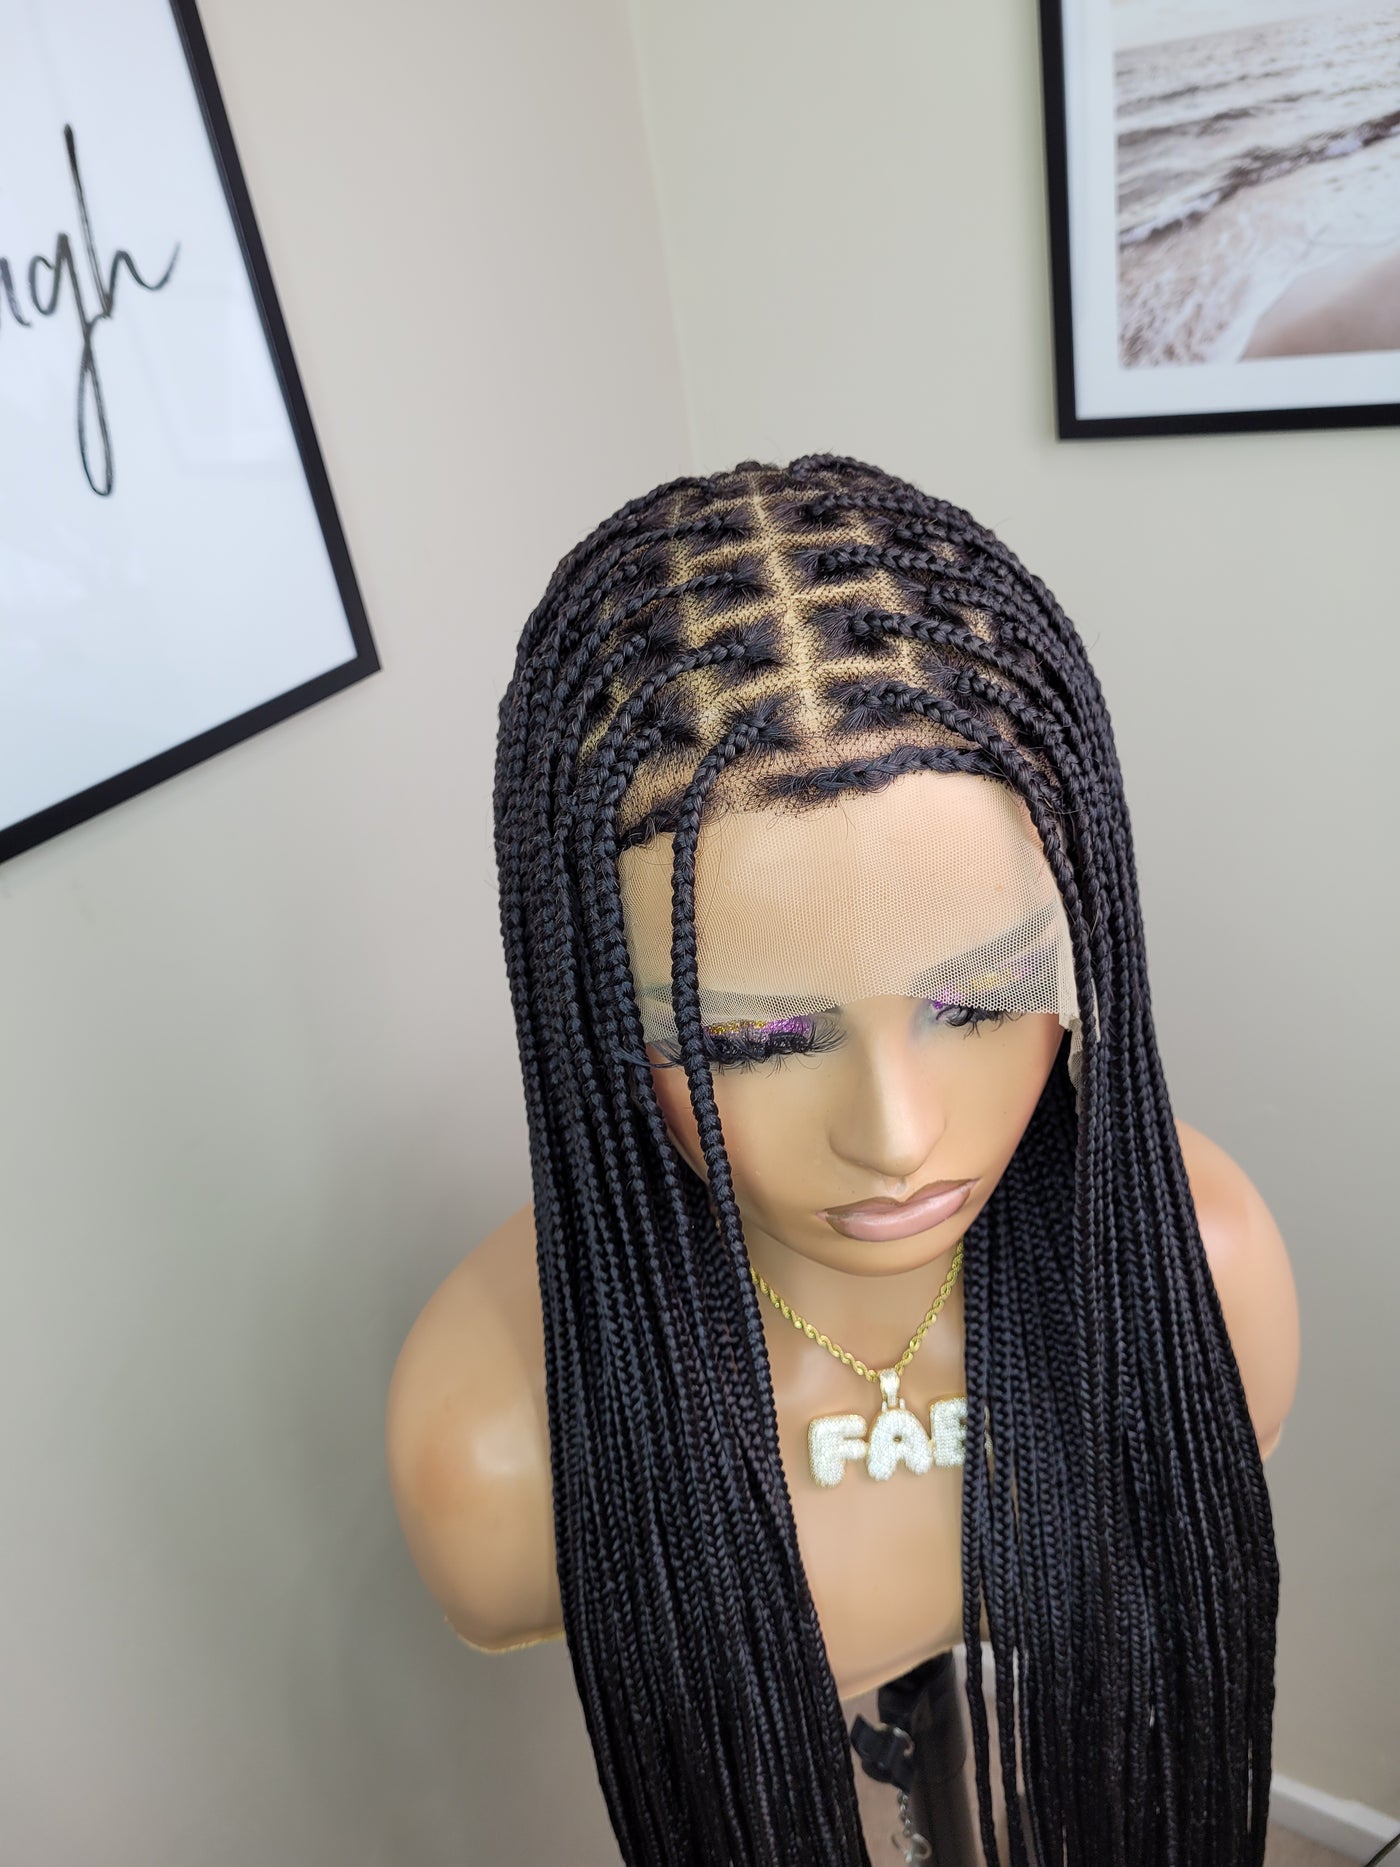 Knotless braided wig Ready to Ship